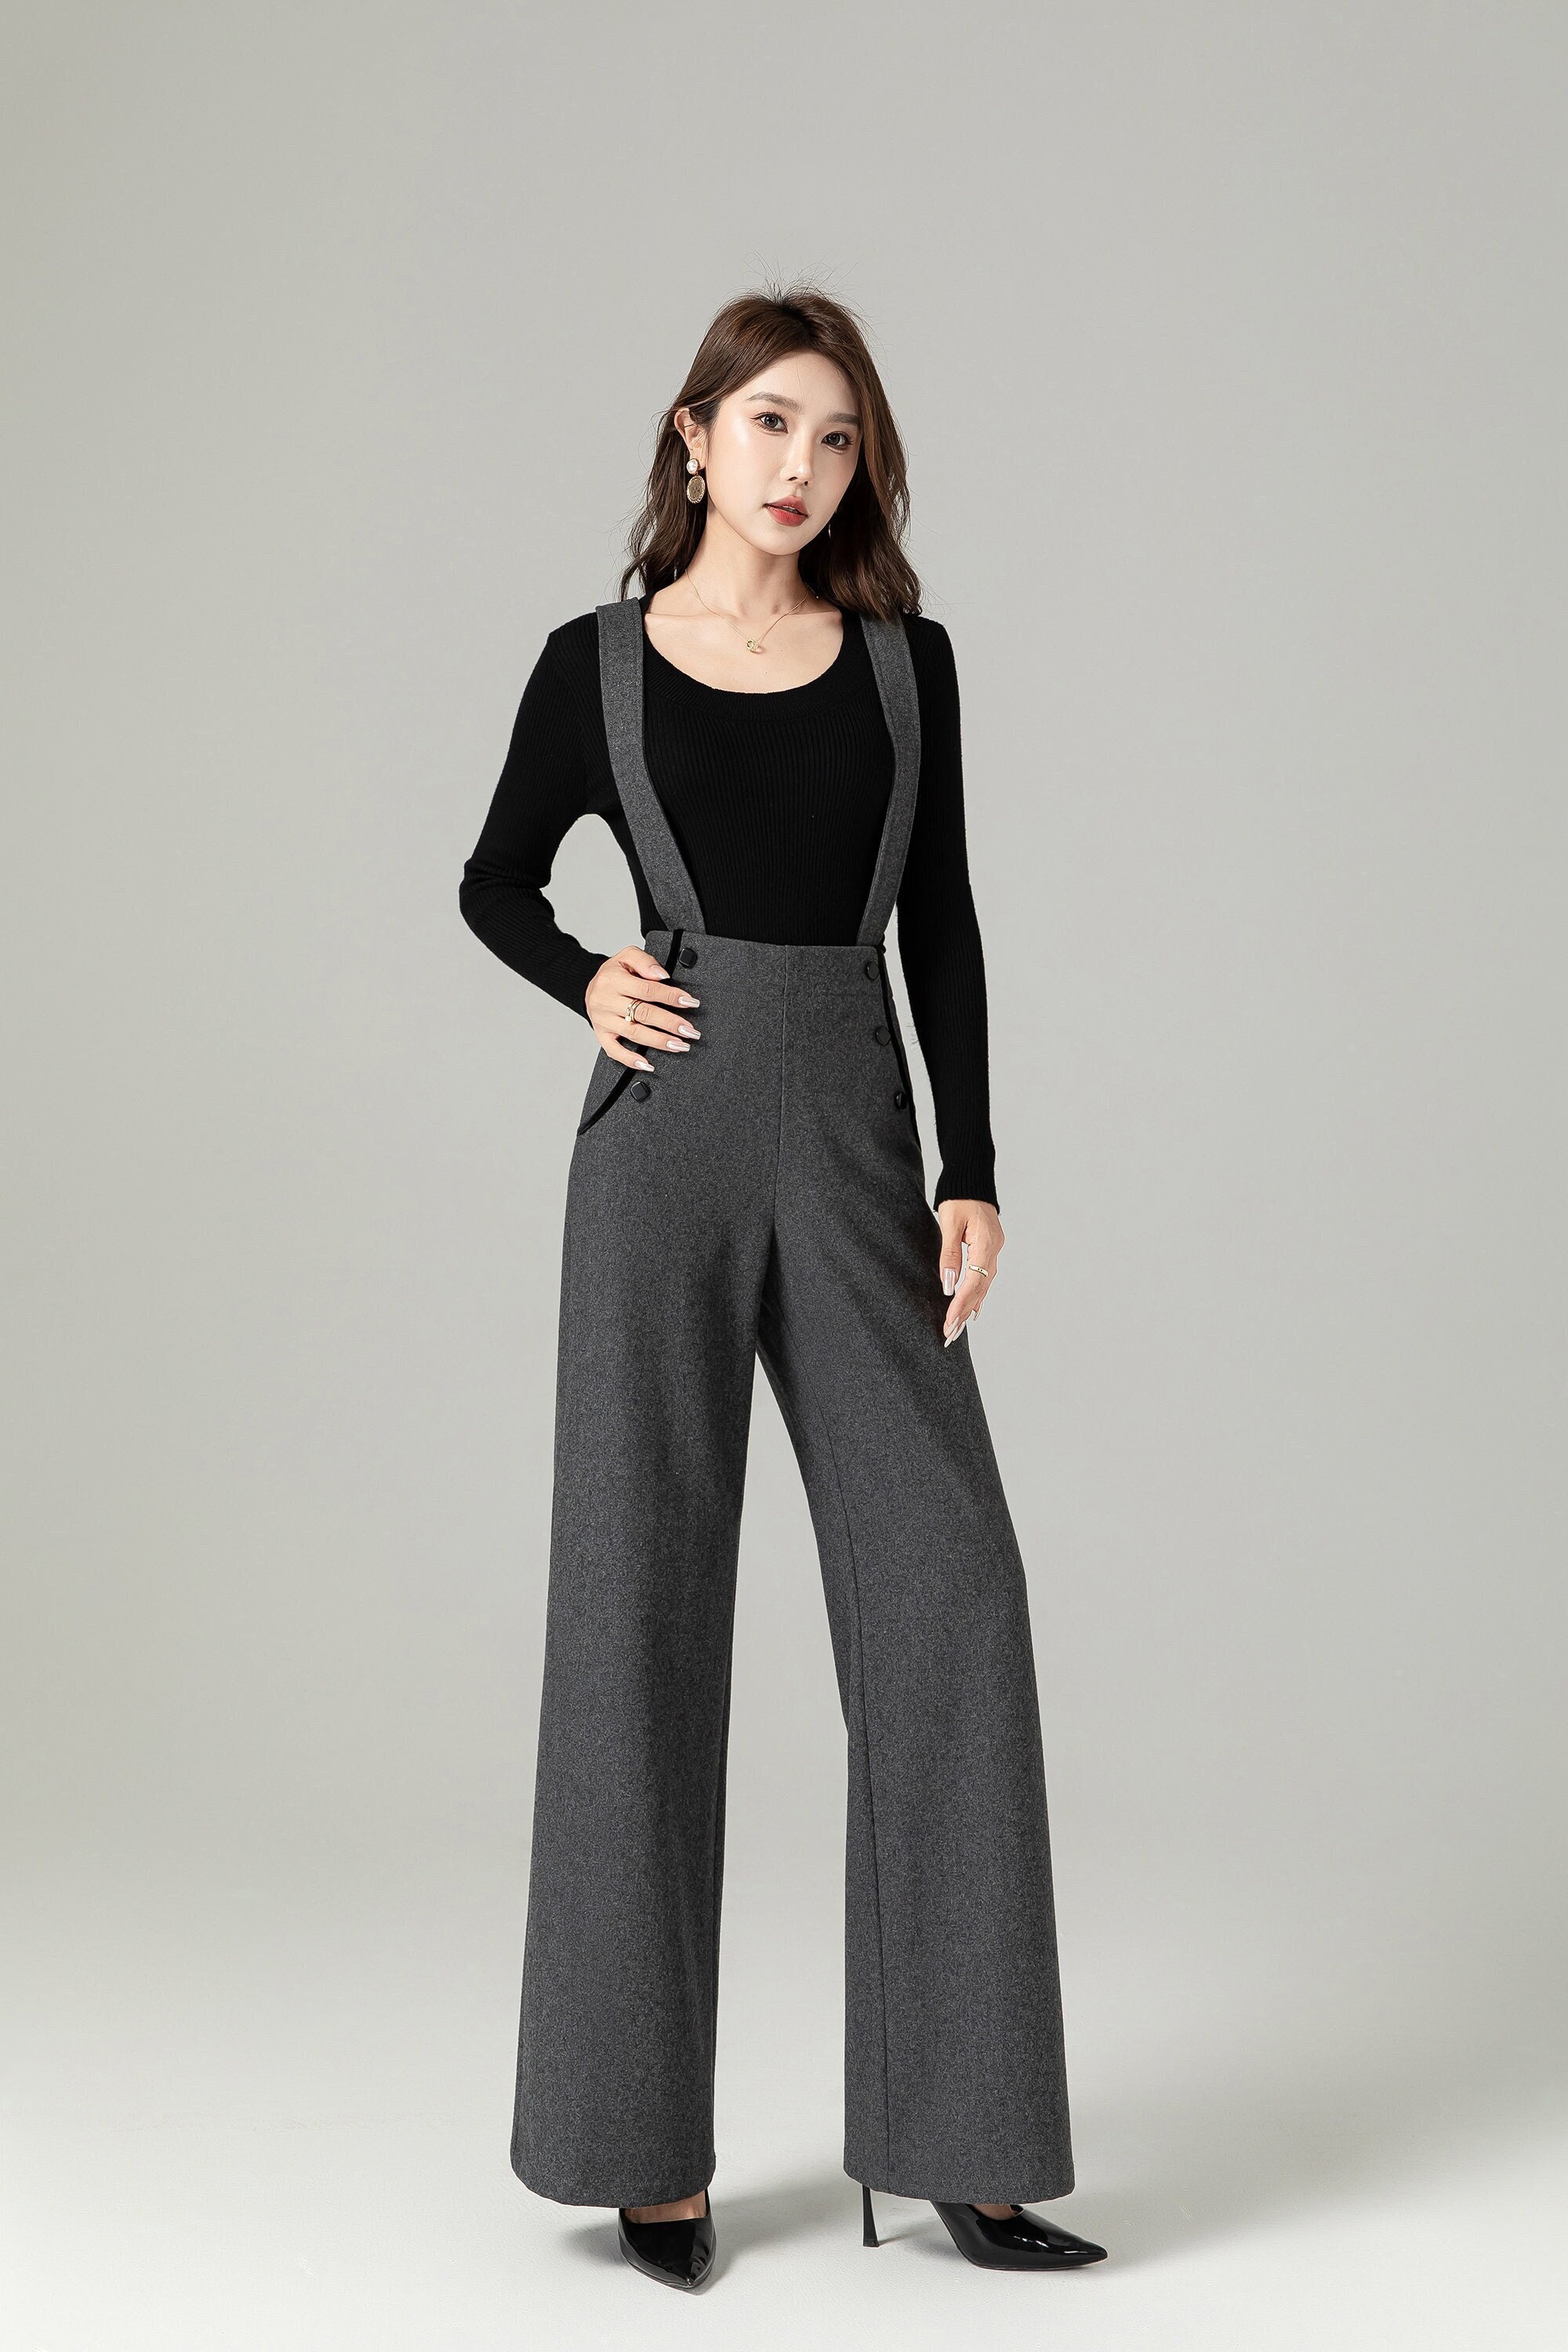 Aboser Women's Casual High Waisted Pants Wide Leg Dress Pants Loose Fit  Pleated Front Trousers Business Work Pants Office Lounge Pants with Pockets